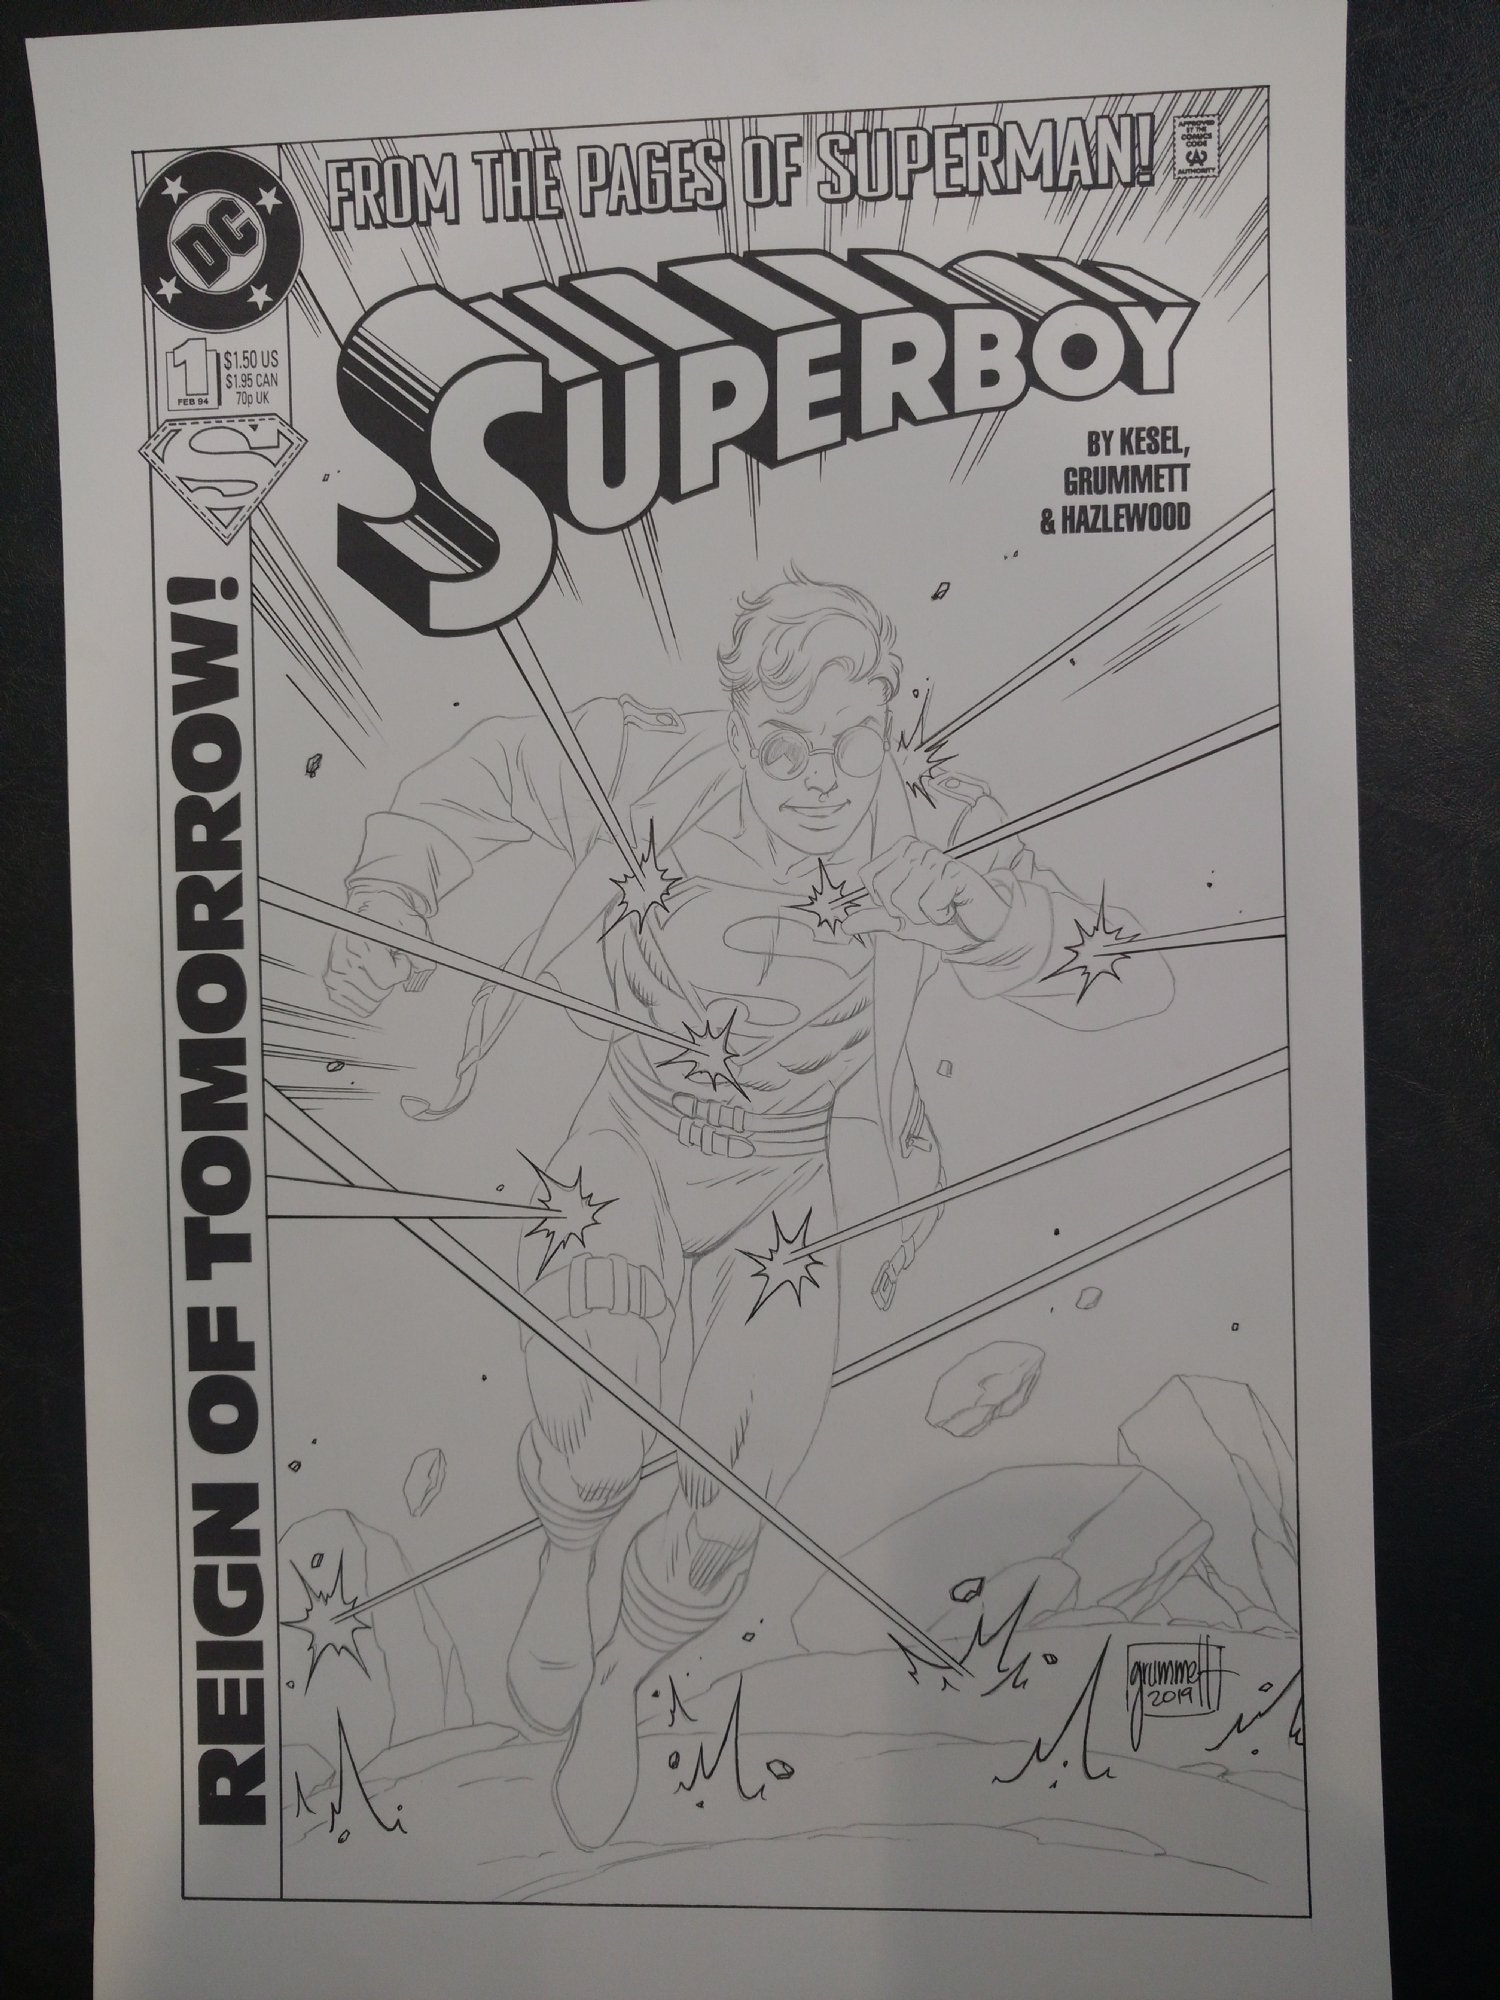 Superboy Vol 4 01 Cover Version By Tom Grummett In Pepe Caldelass Covers Recreations As 4038